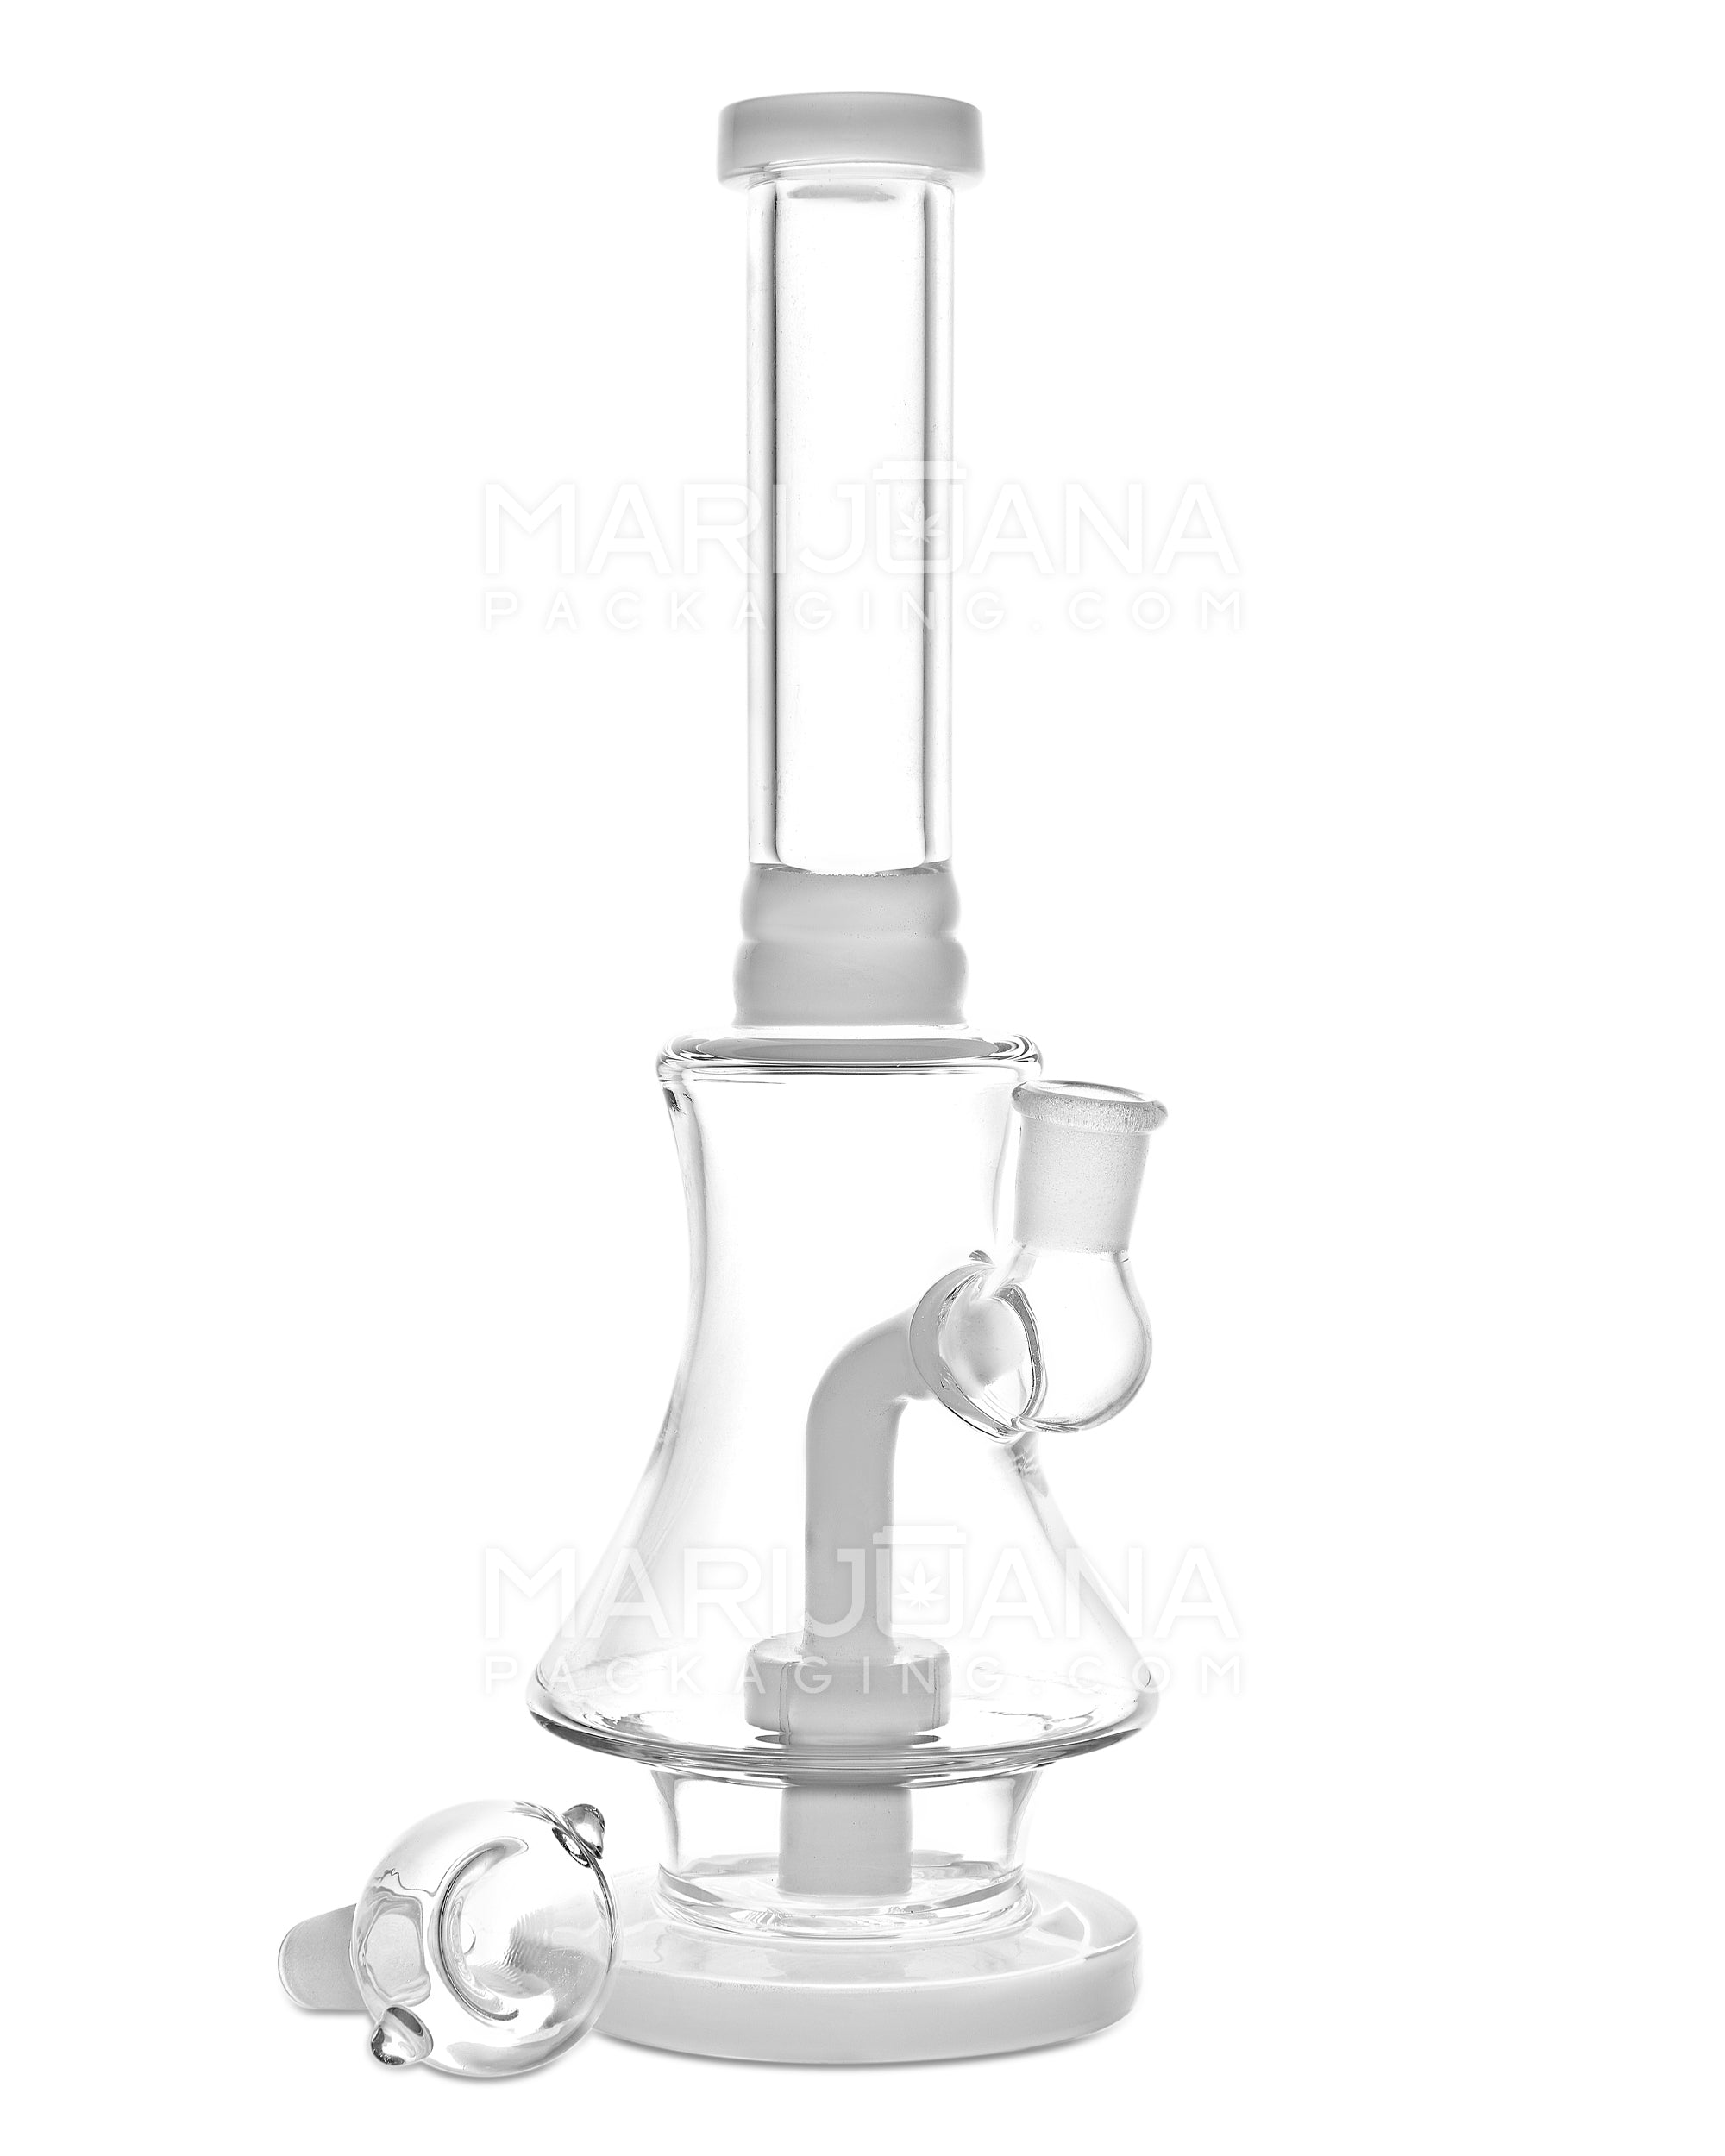 Straight Neck Showerhead Perc Glass Bell Water Pipe | 10in Tall - 14mm Bowl - White - 2